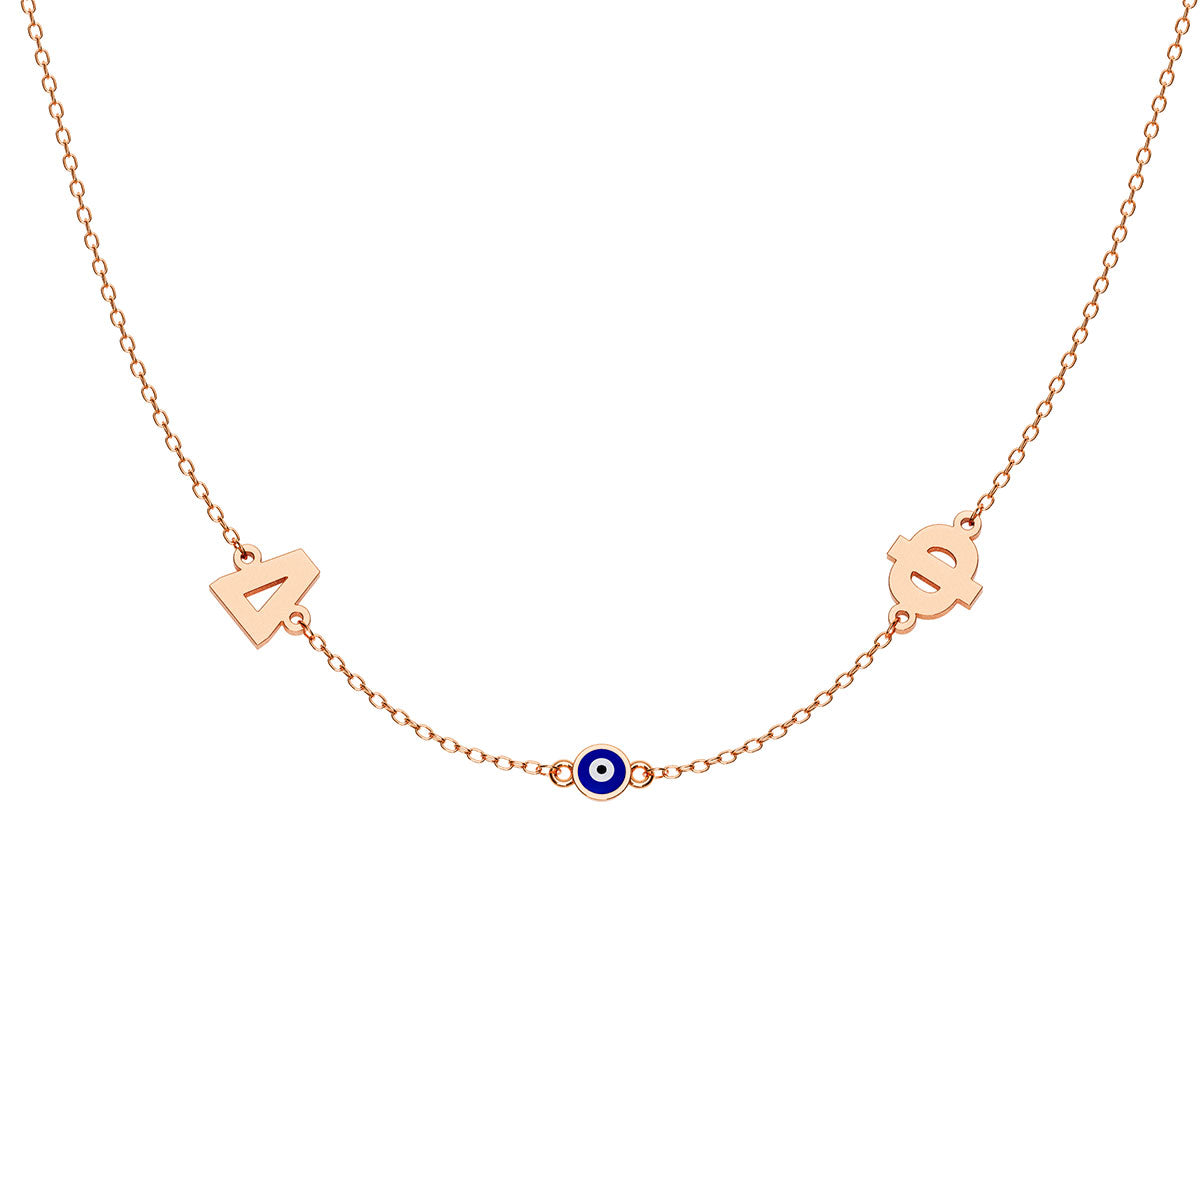 Greek Personalized 2 Initial Necklace With Round Evil Eye Charm